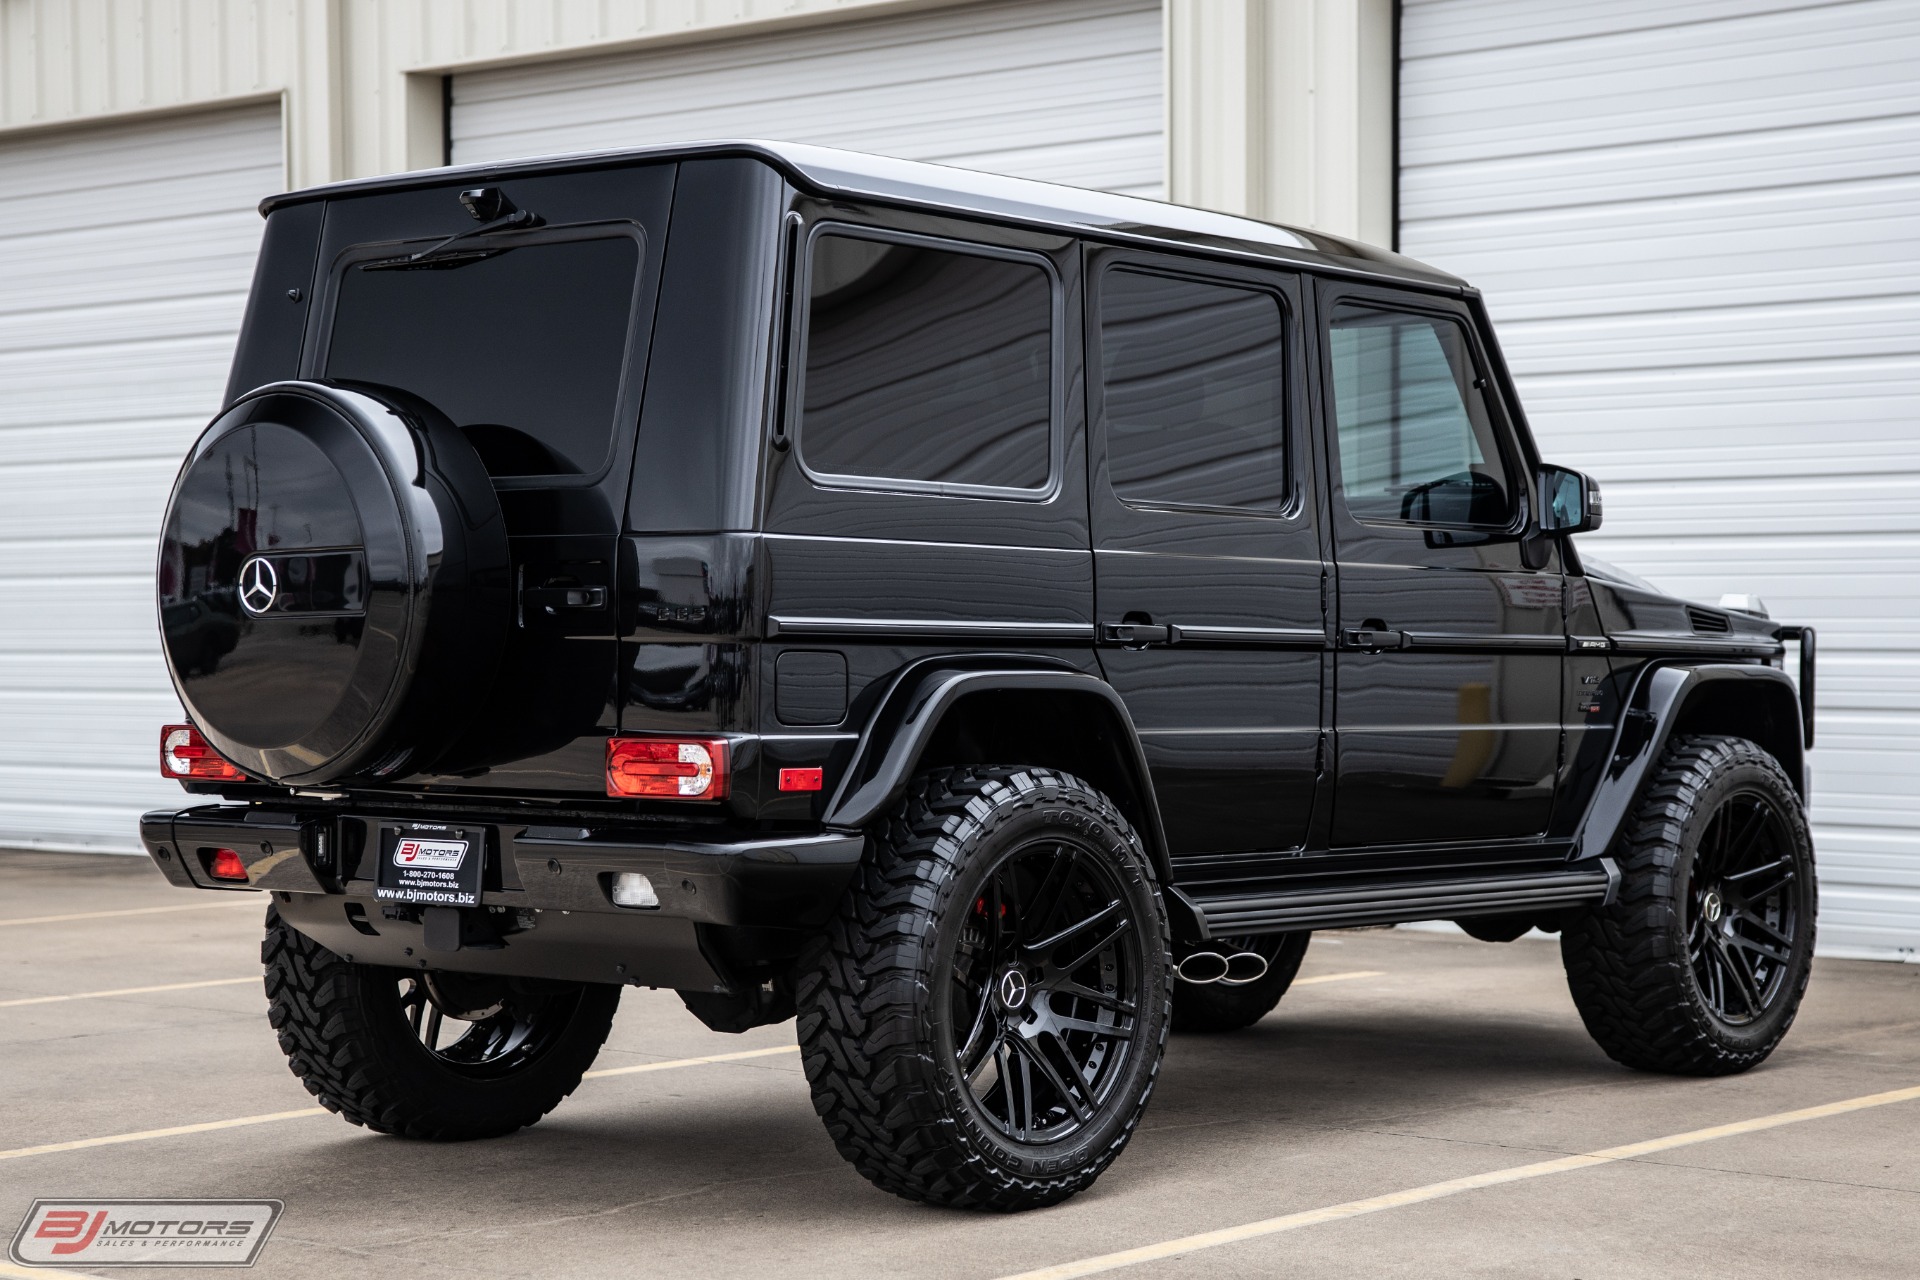 Mercedes-Benz Will Sell The V12 2016 G65 AMG in US - YouWheel.com ...